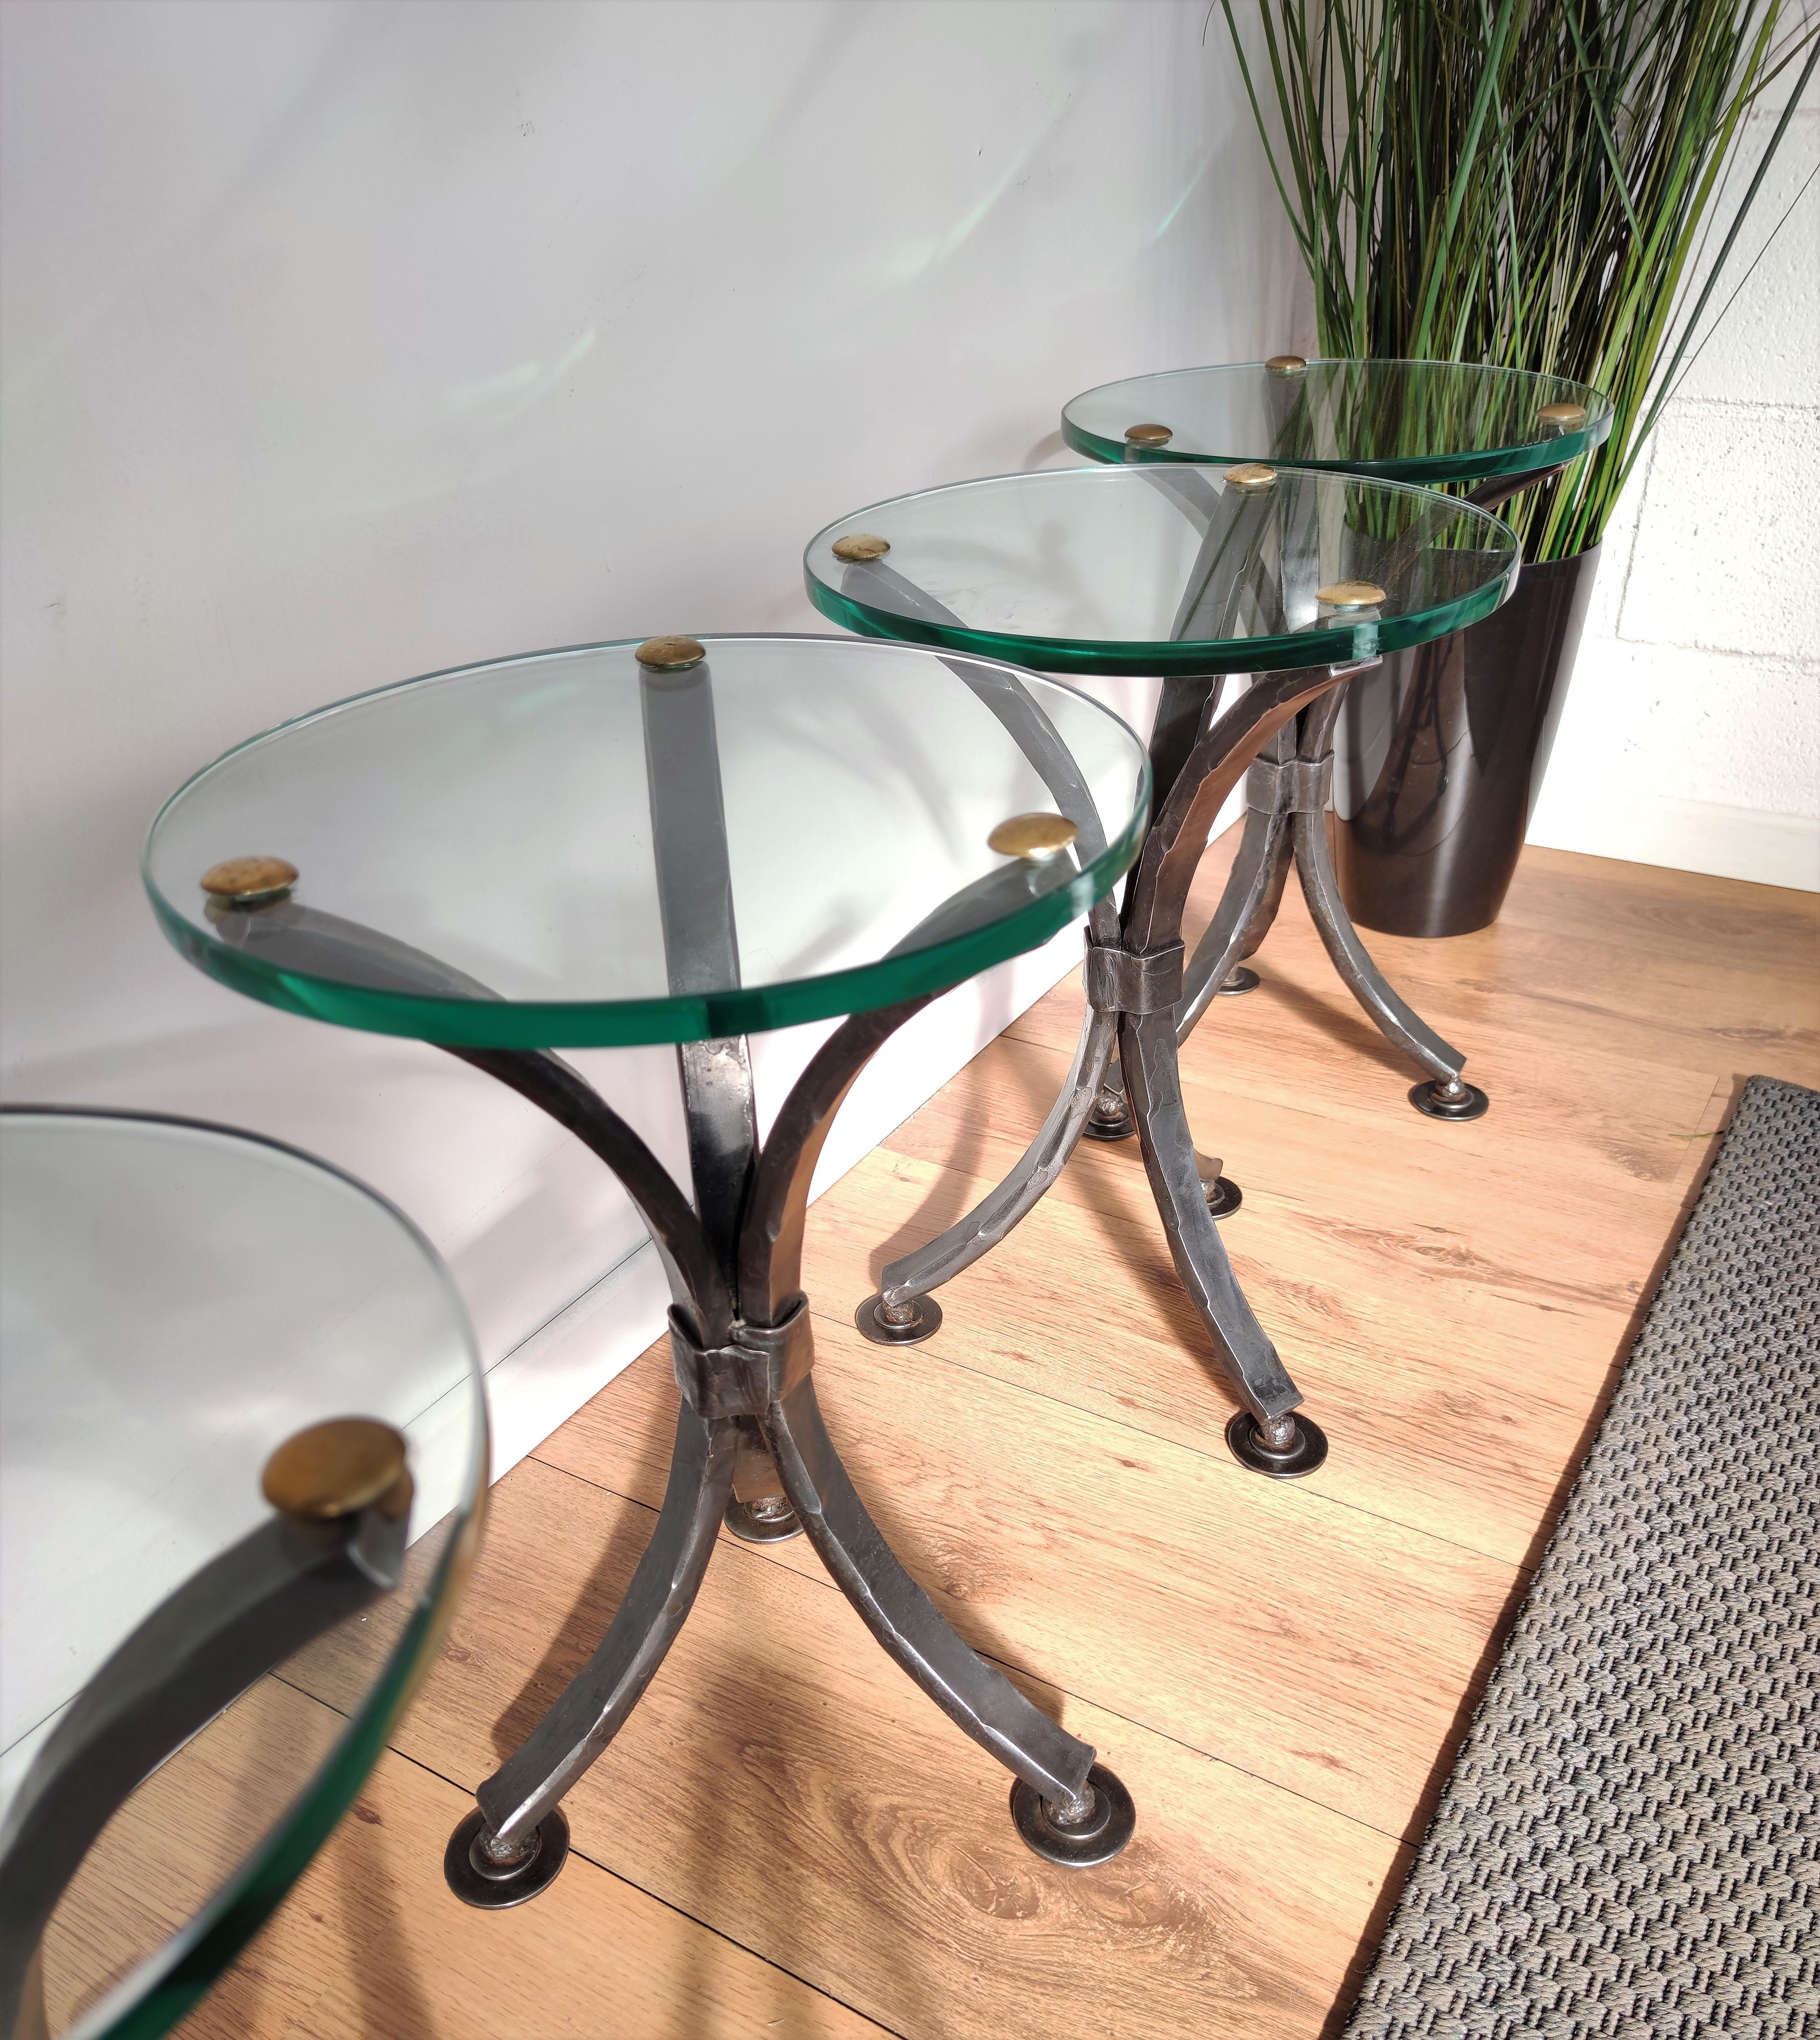 Beautifully hand crafted wrought iron round tripod pedestal side tables with strong and thick glass top, fixed with decorative brass nails. The 3 legs, greatly shaped and forged with the typical finish of hand forging, are finished with round feet